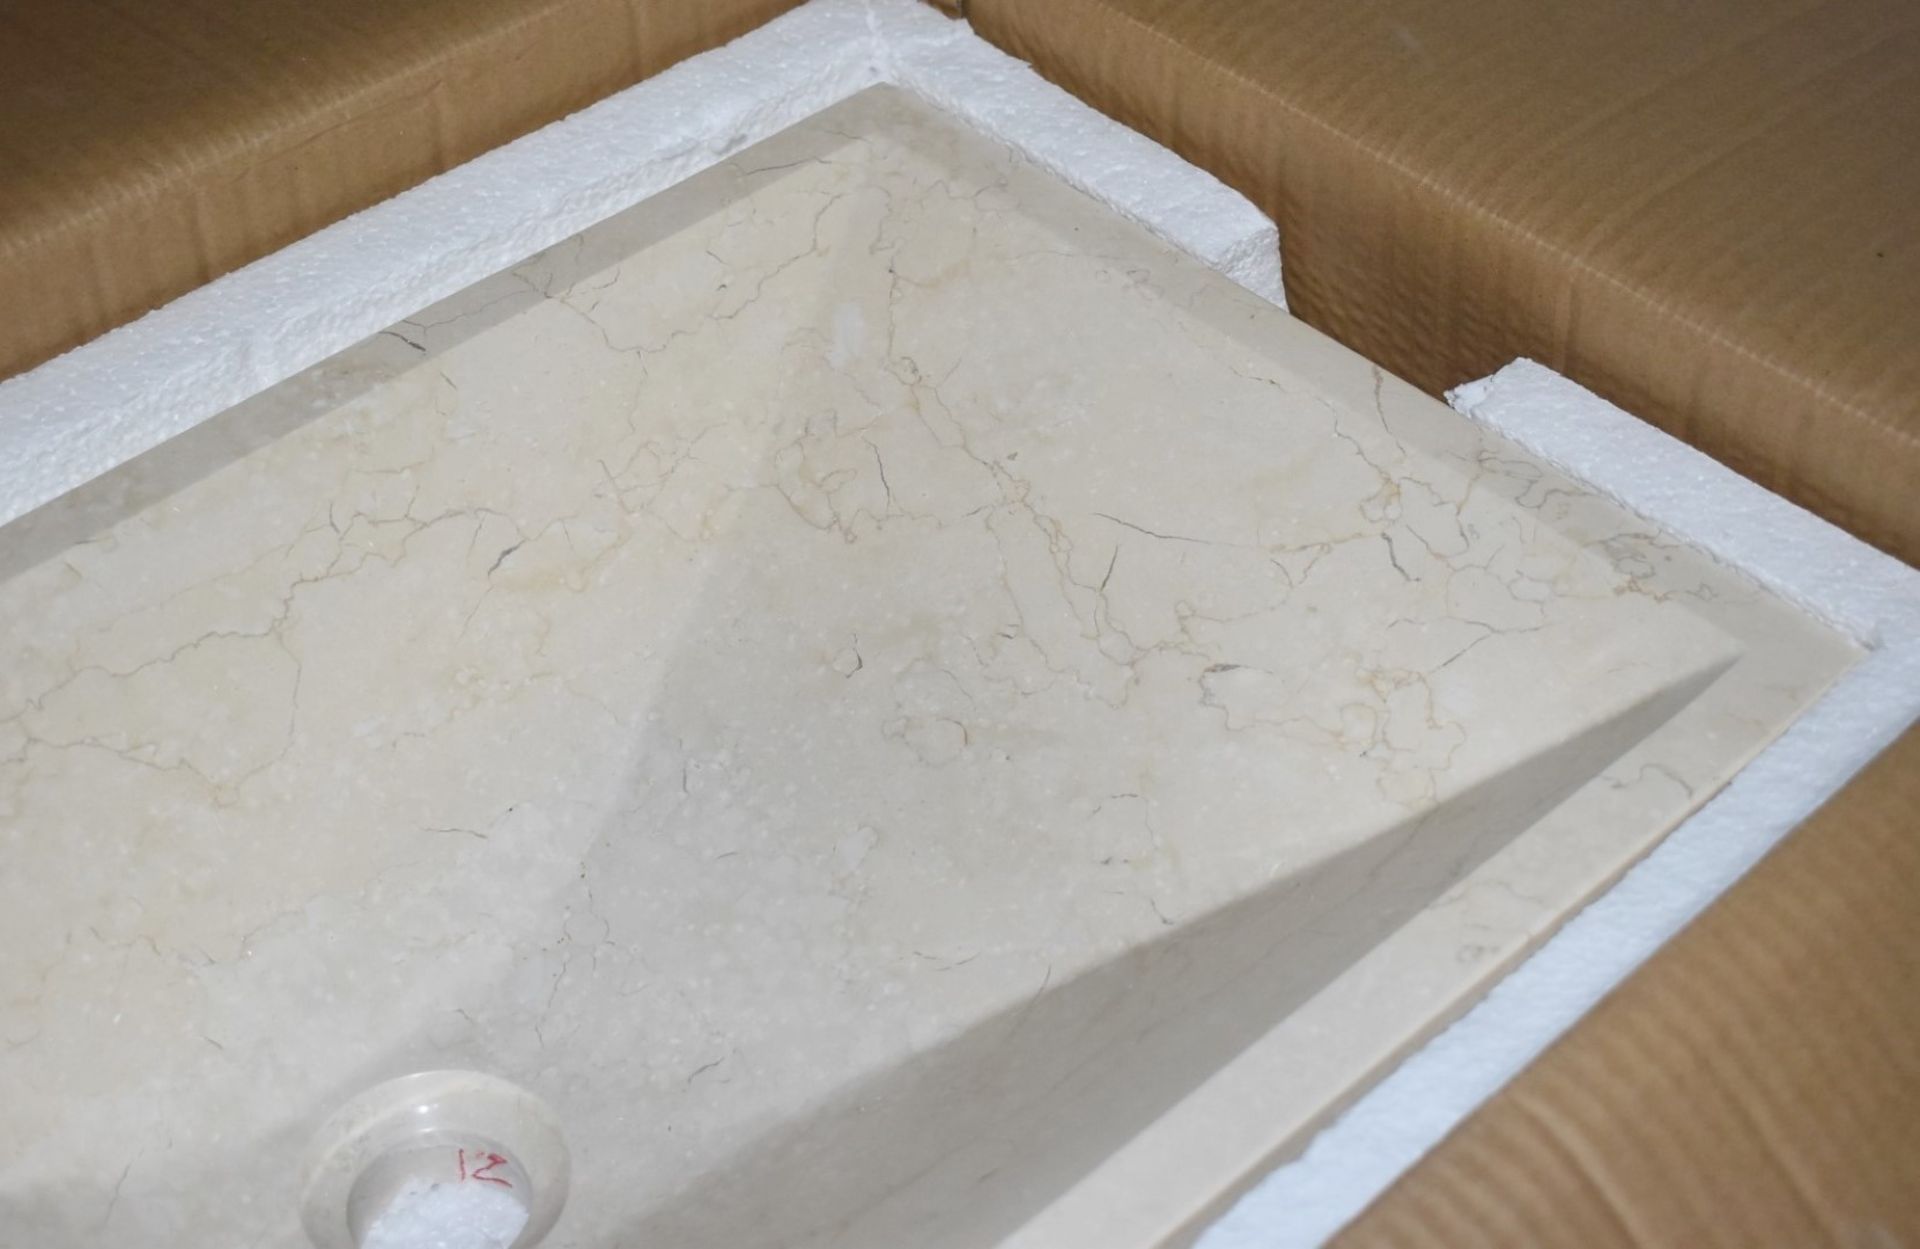 1 x Stonearth 'Karo' Solid Travertine Stone Countertop Sink Basin - New Boxed Stock - RRP £525 - Image 4 of 8